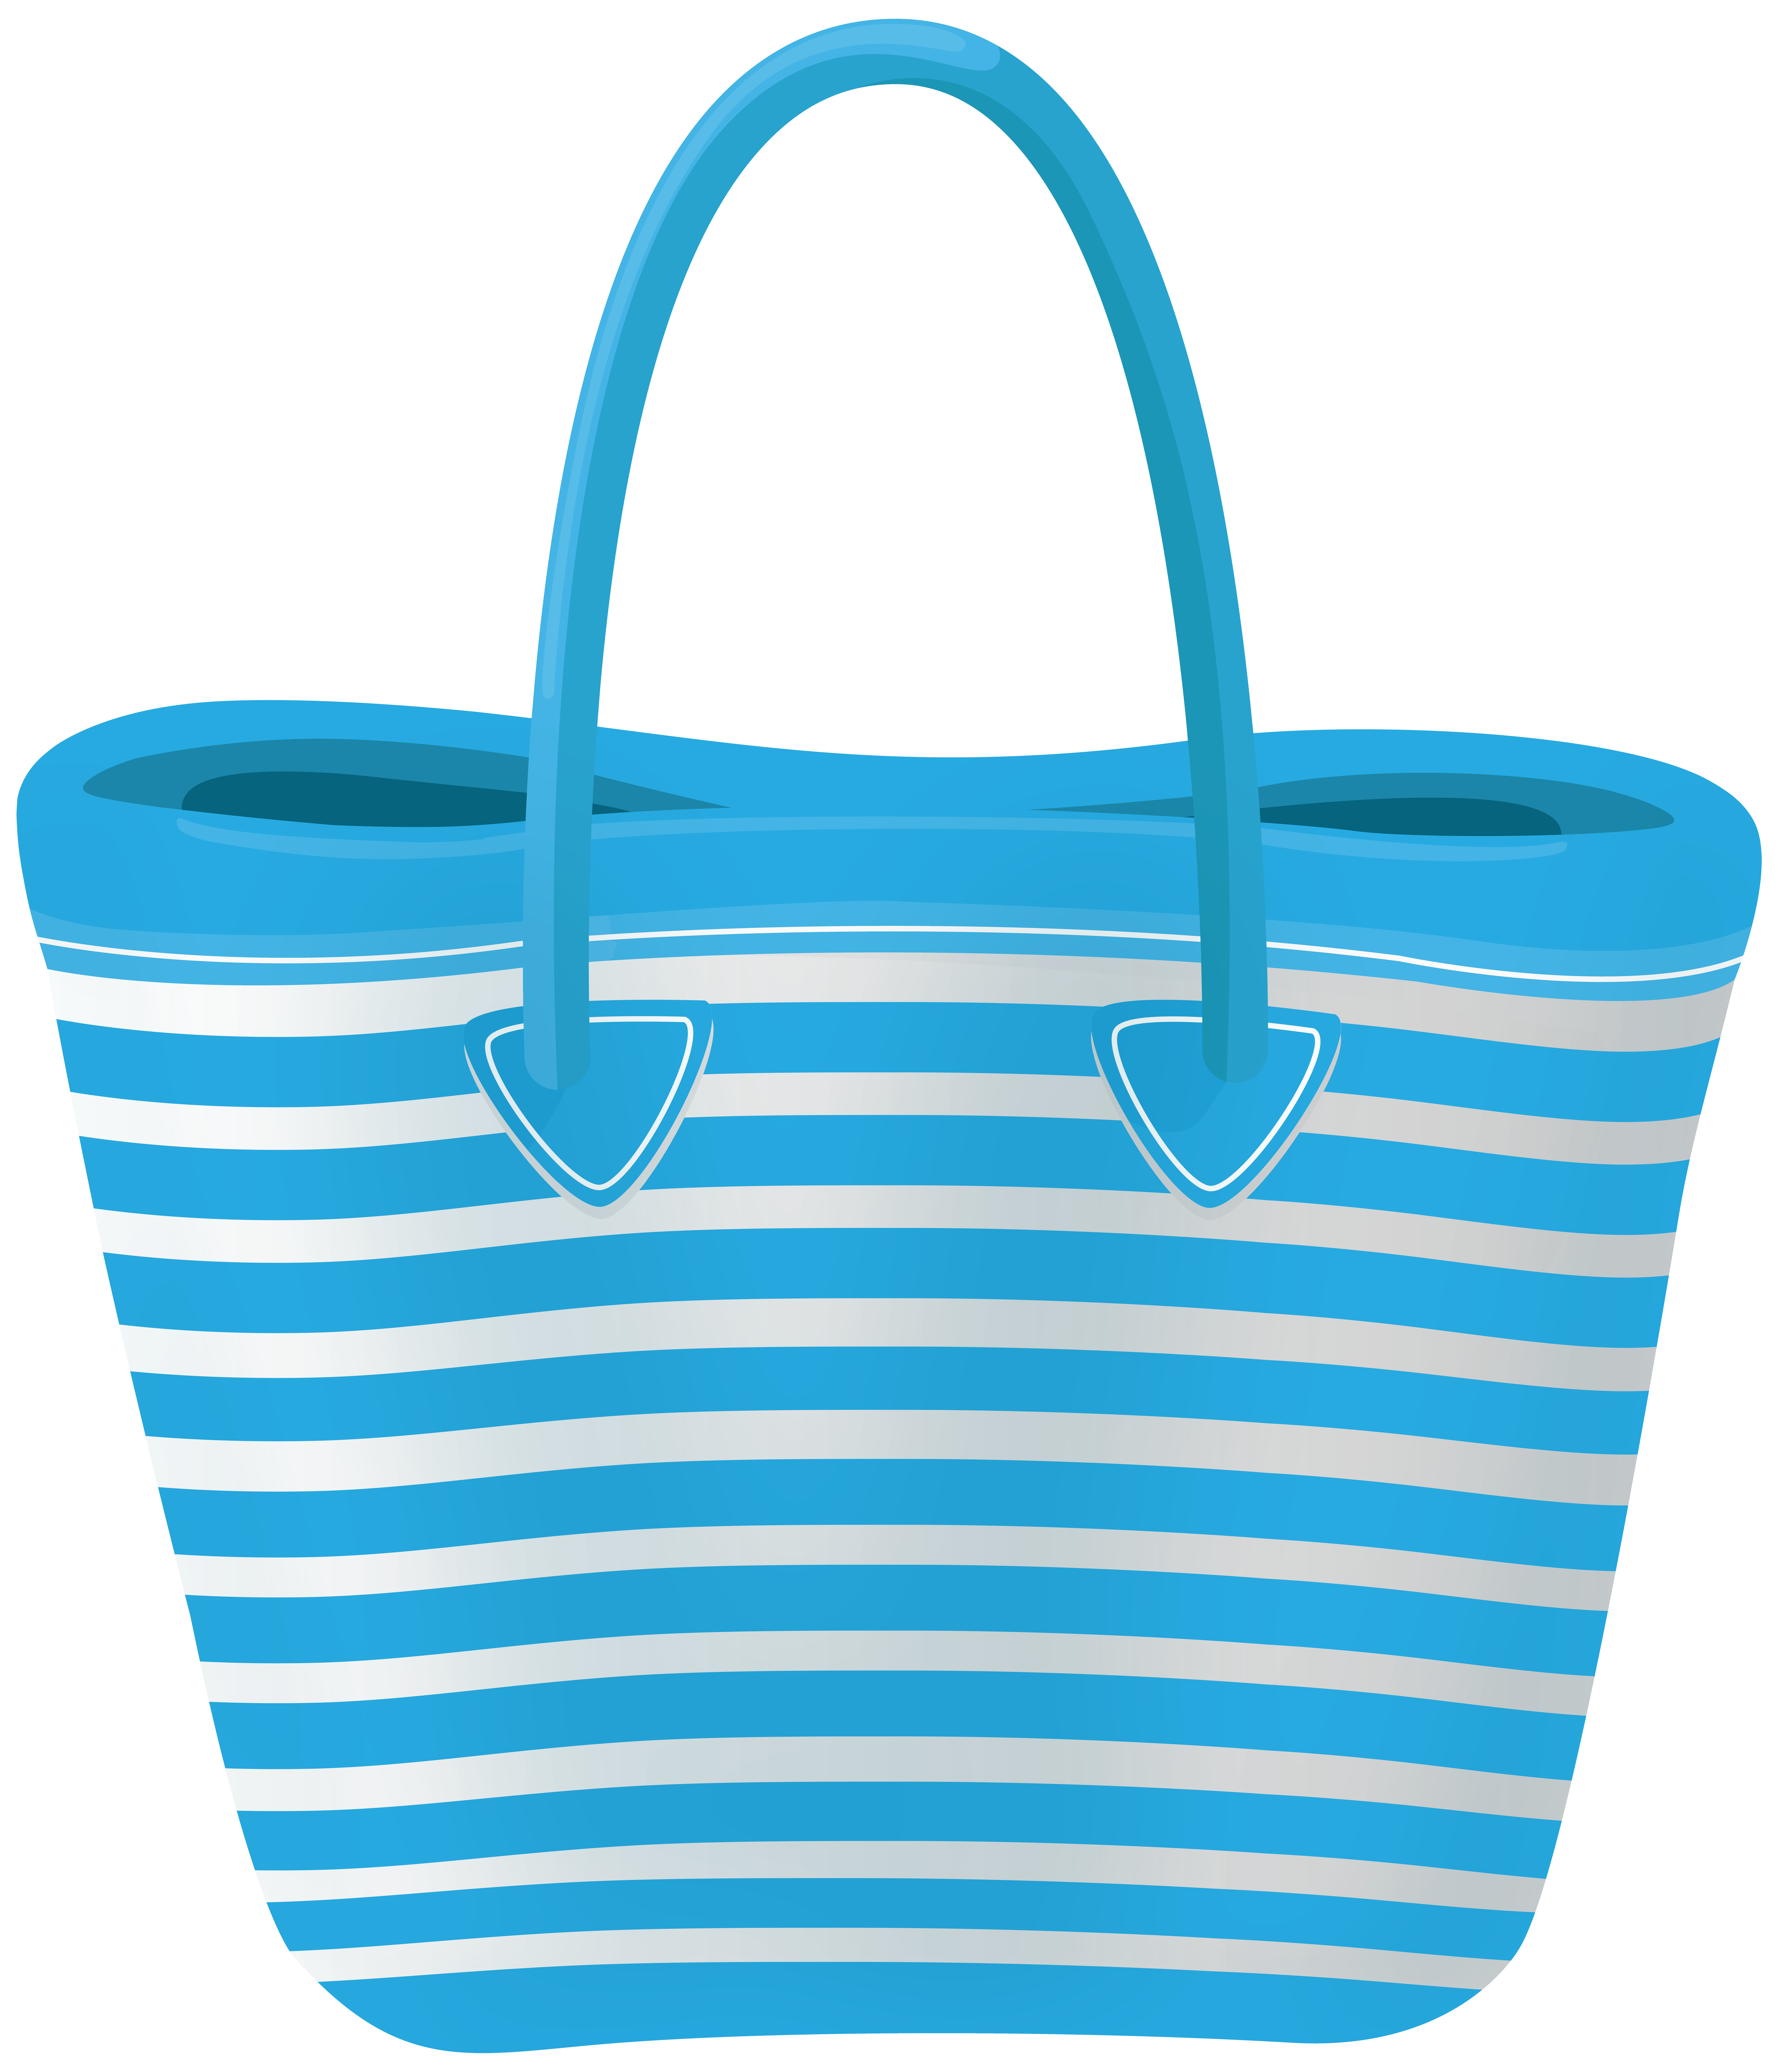 Tote Bag Icon Free Vector Illustration Material PNG Image And Clipart Image  For Free Download - Lovepik | 401496158